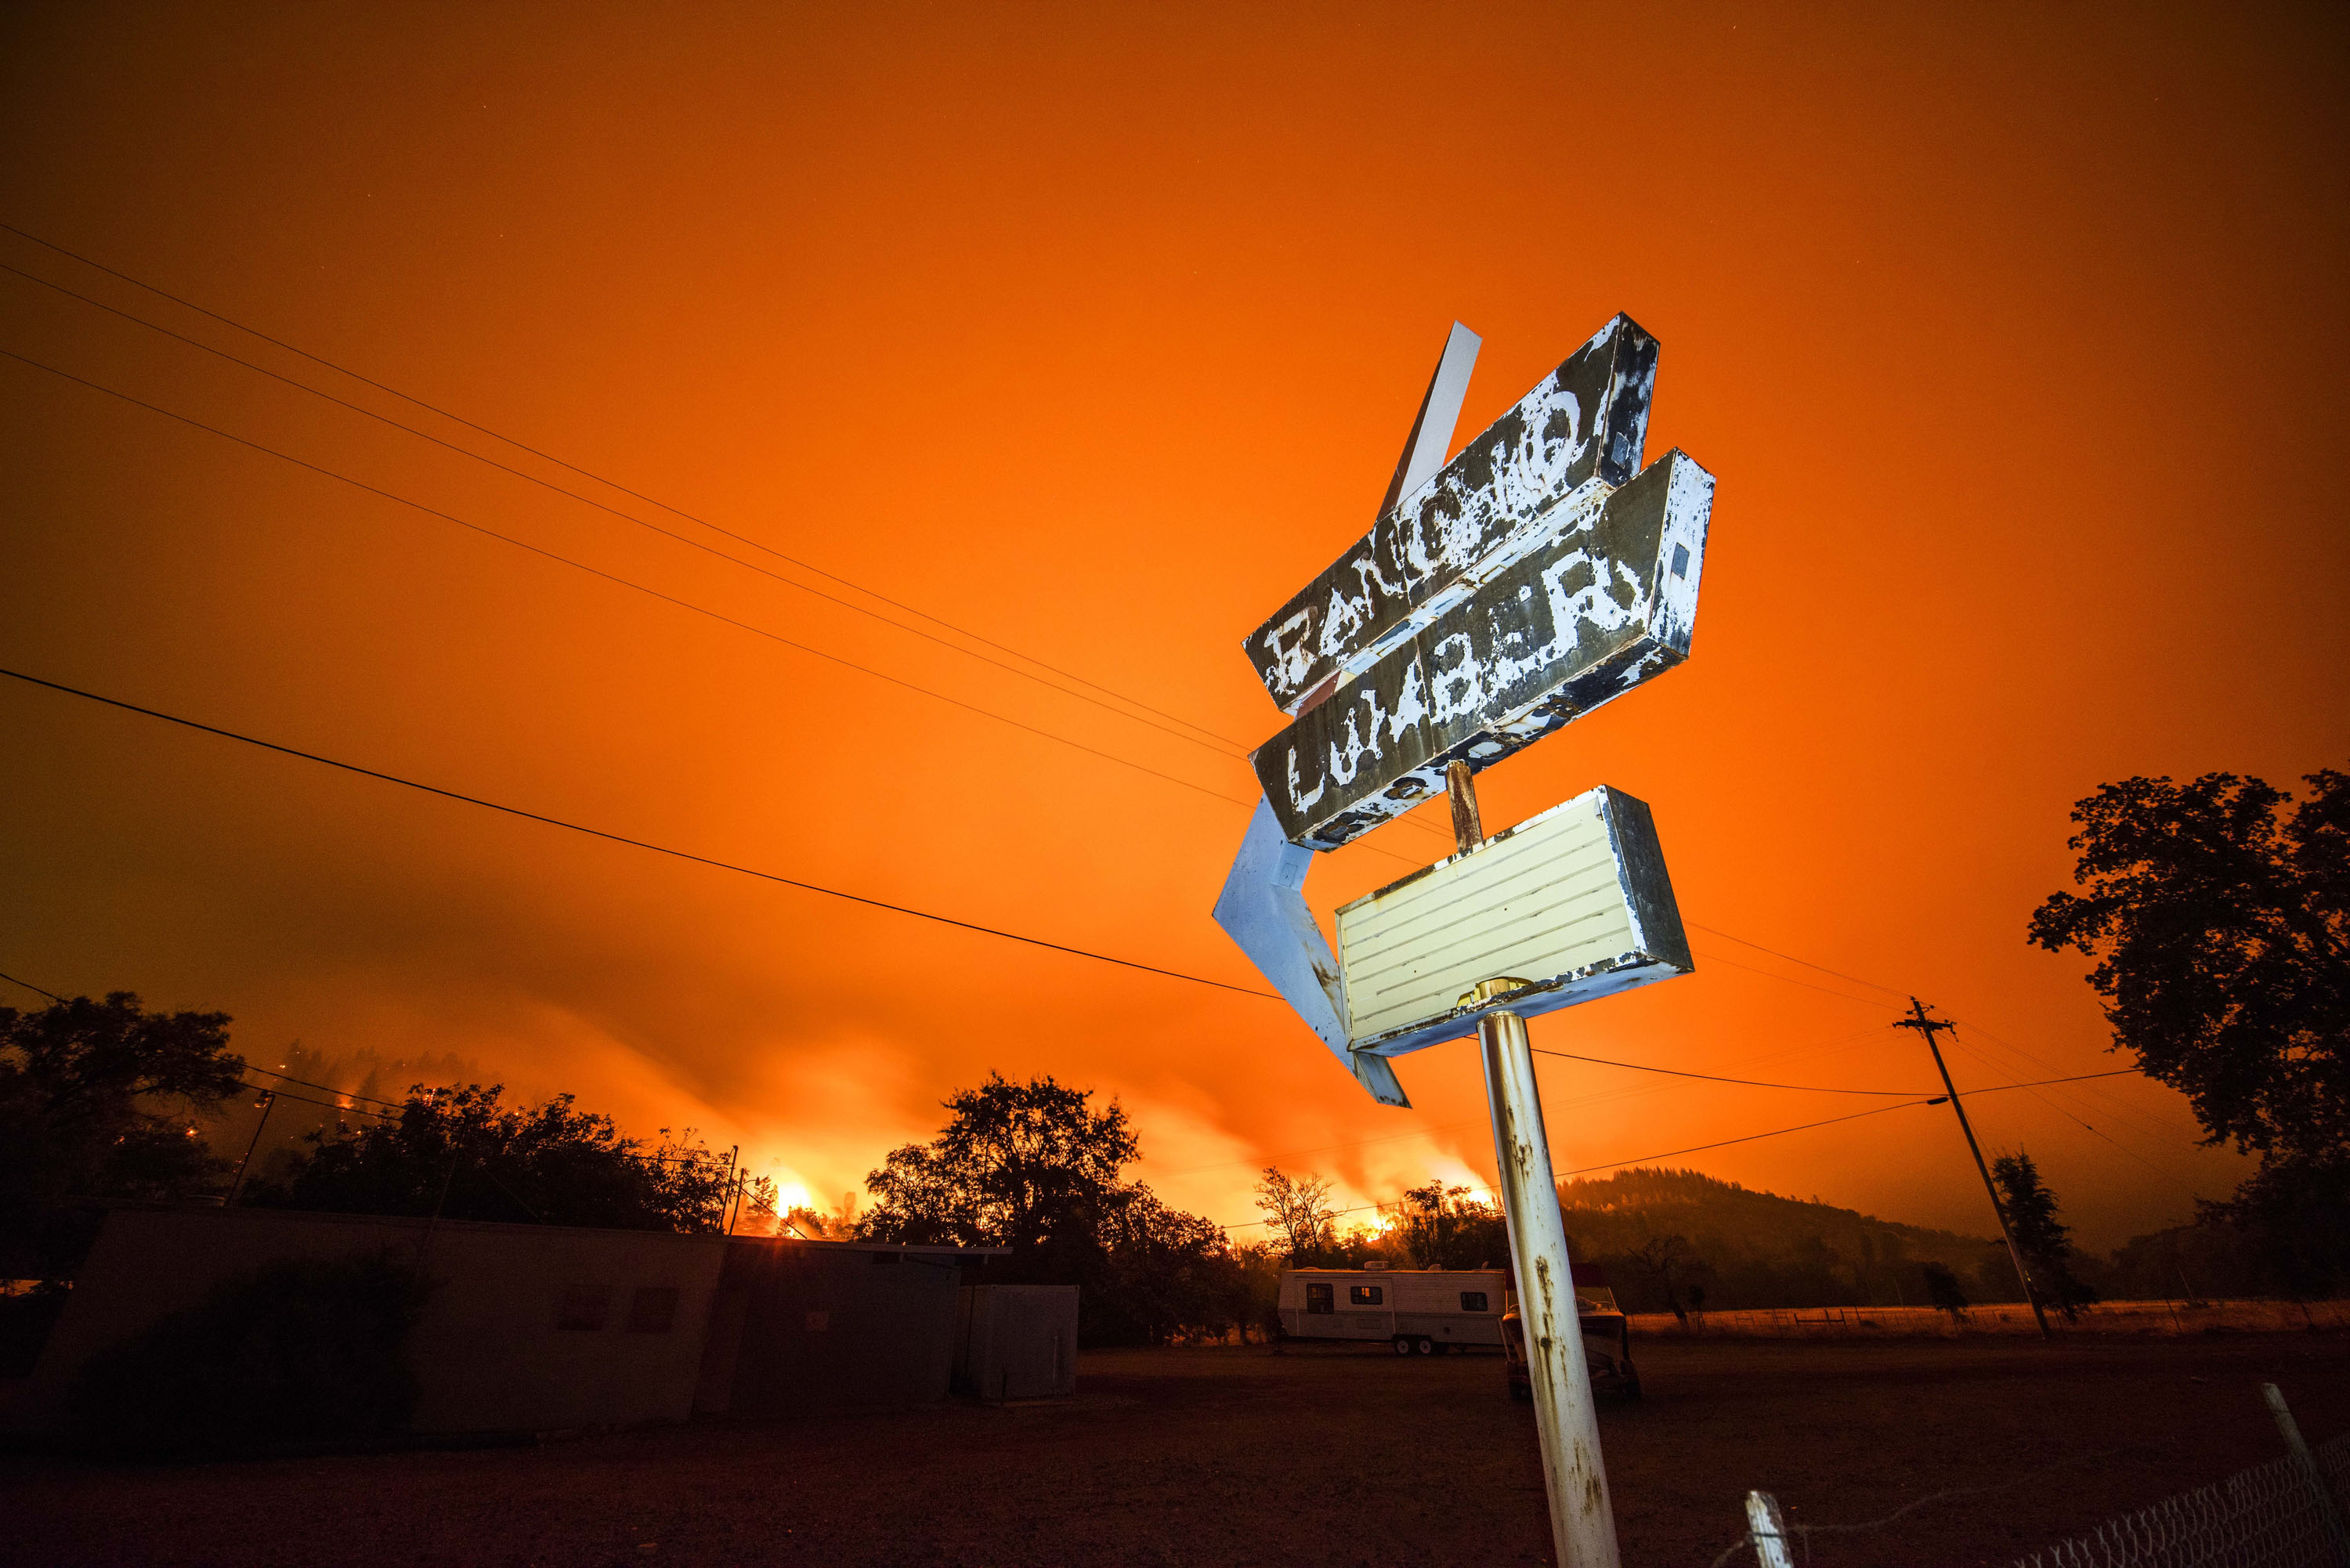 The Valley Fire in Northern California is one of many devastating wildfires to hit the U.S. this year. (Stuart Palley)